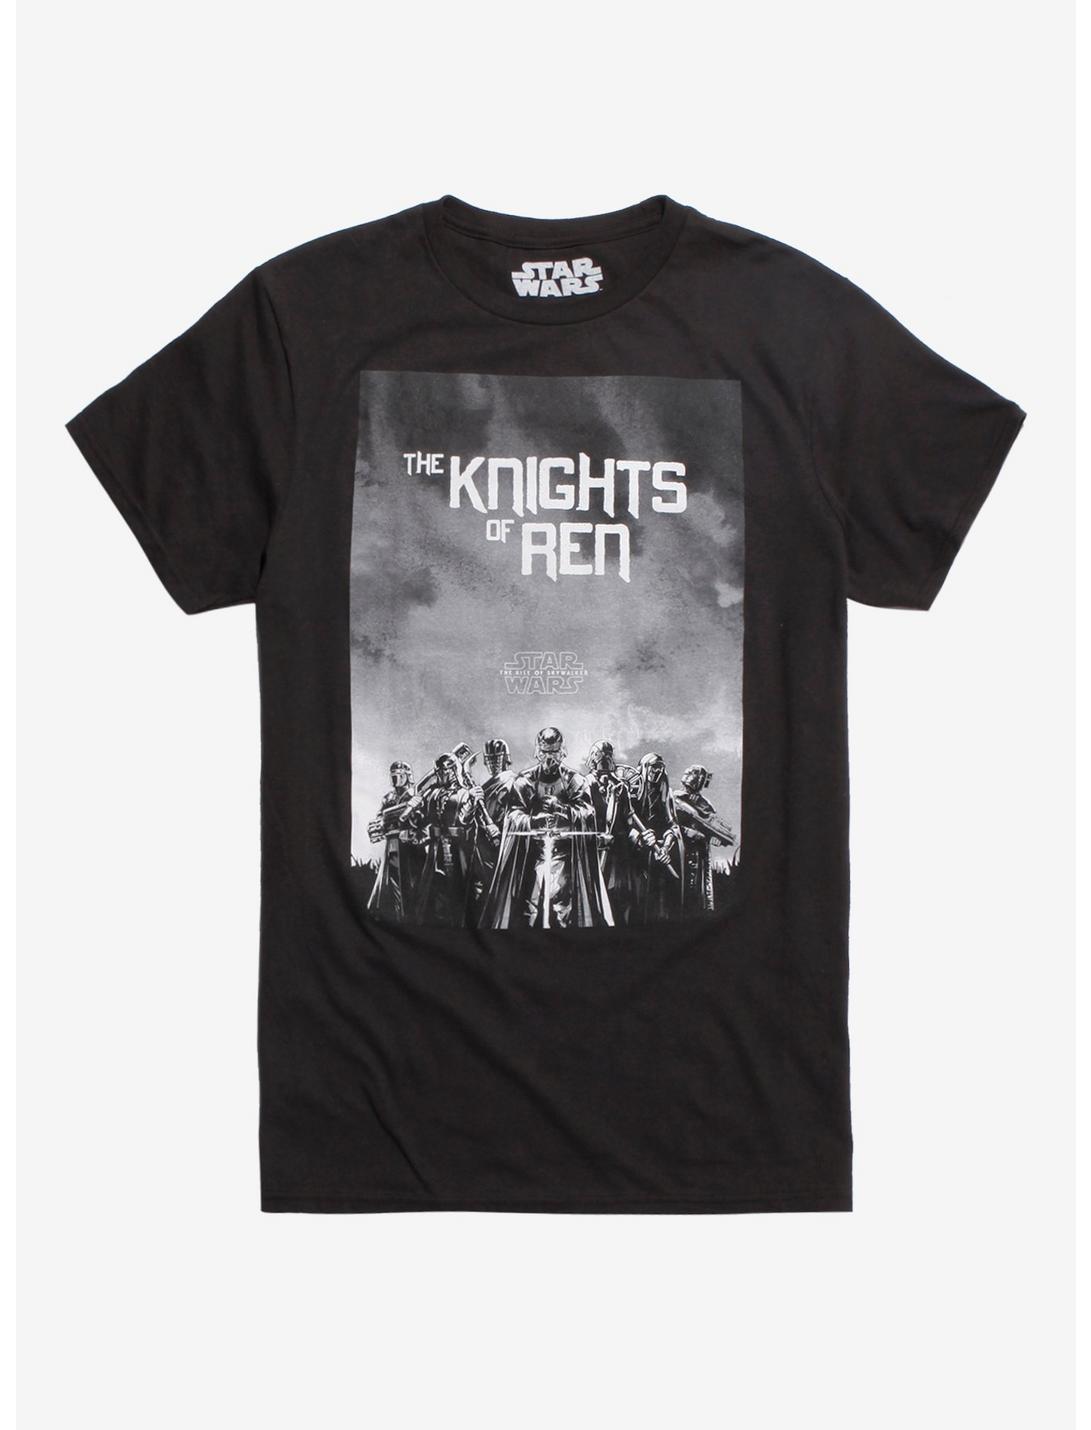 Our Universe Star Wars: The Rise Of Skywalker The Knights Of Ren Black & White T-Shirt, BLACK, hi-res